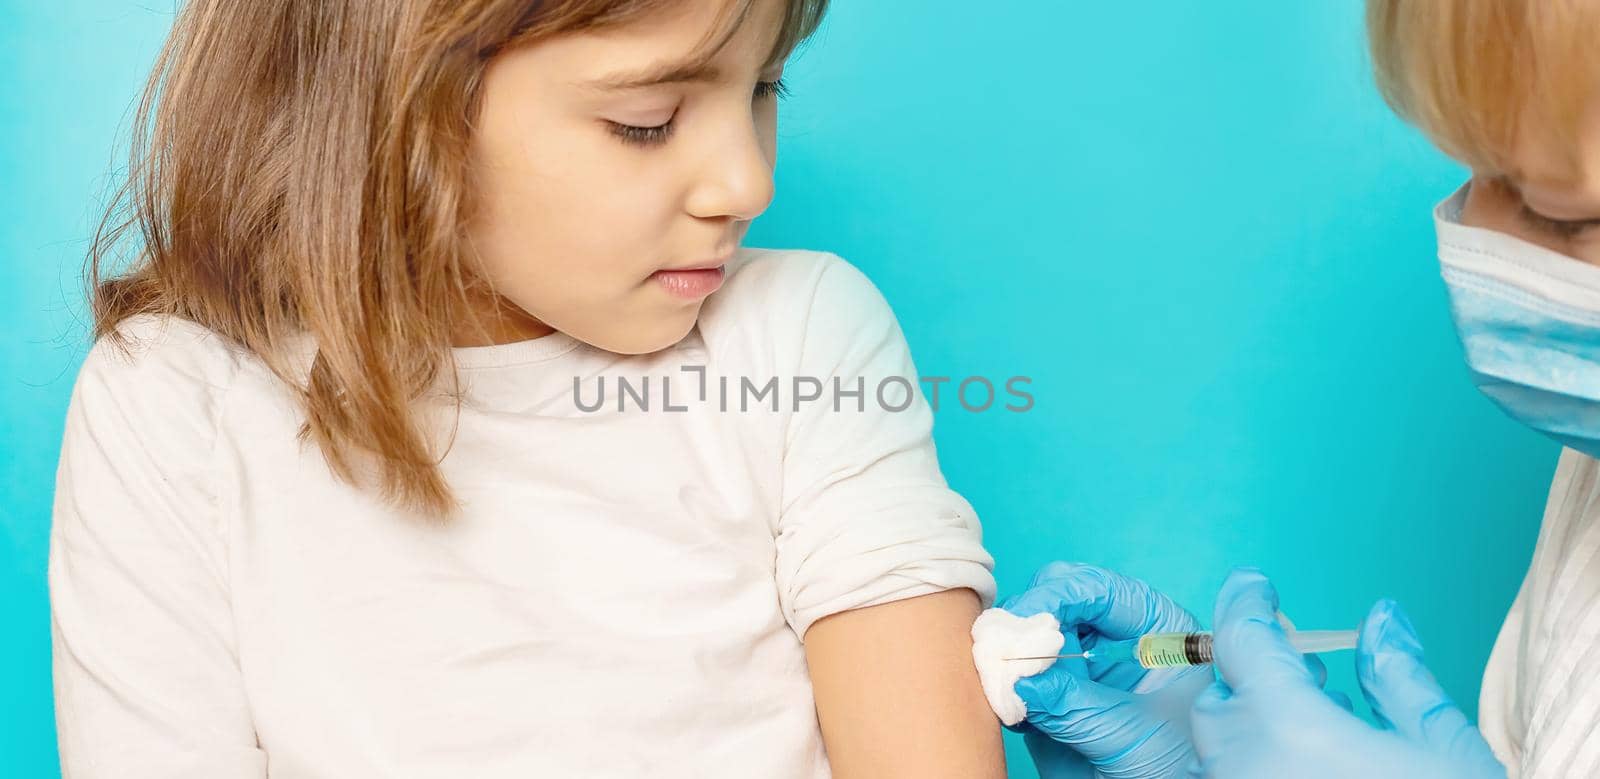 The child is injected into the arm. Selective focus.